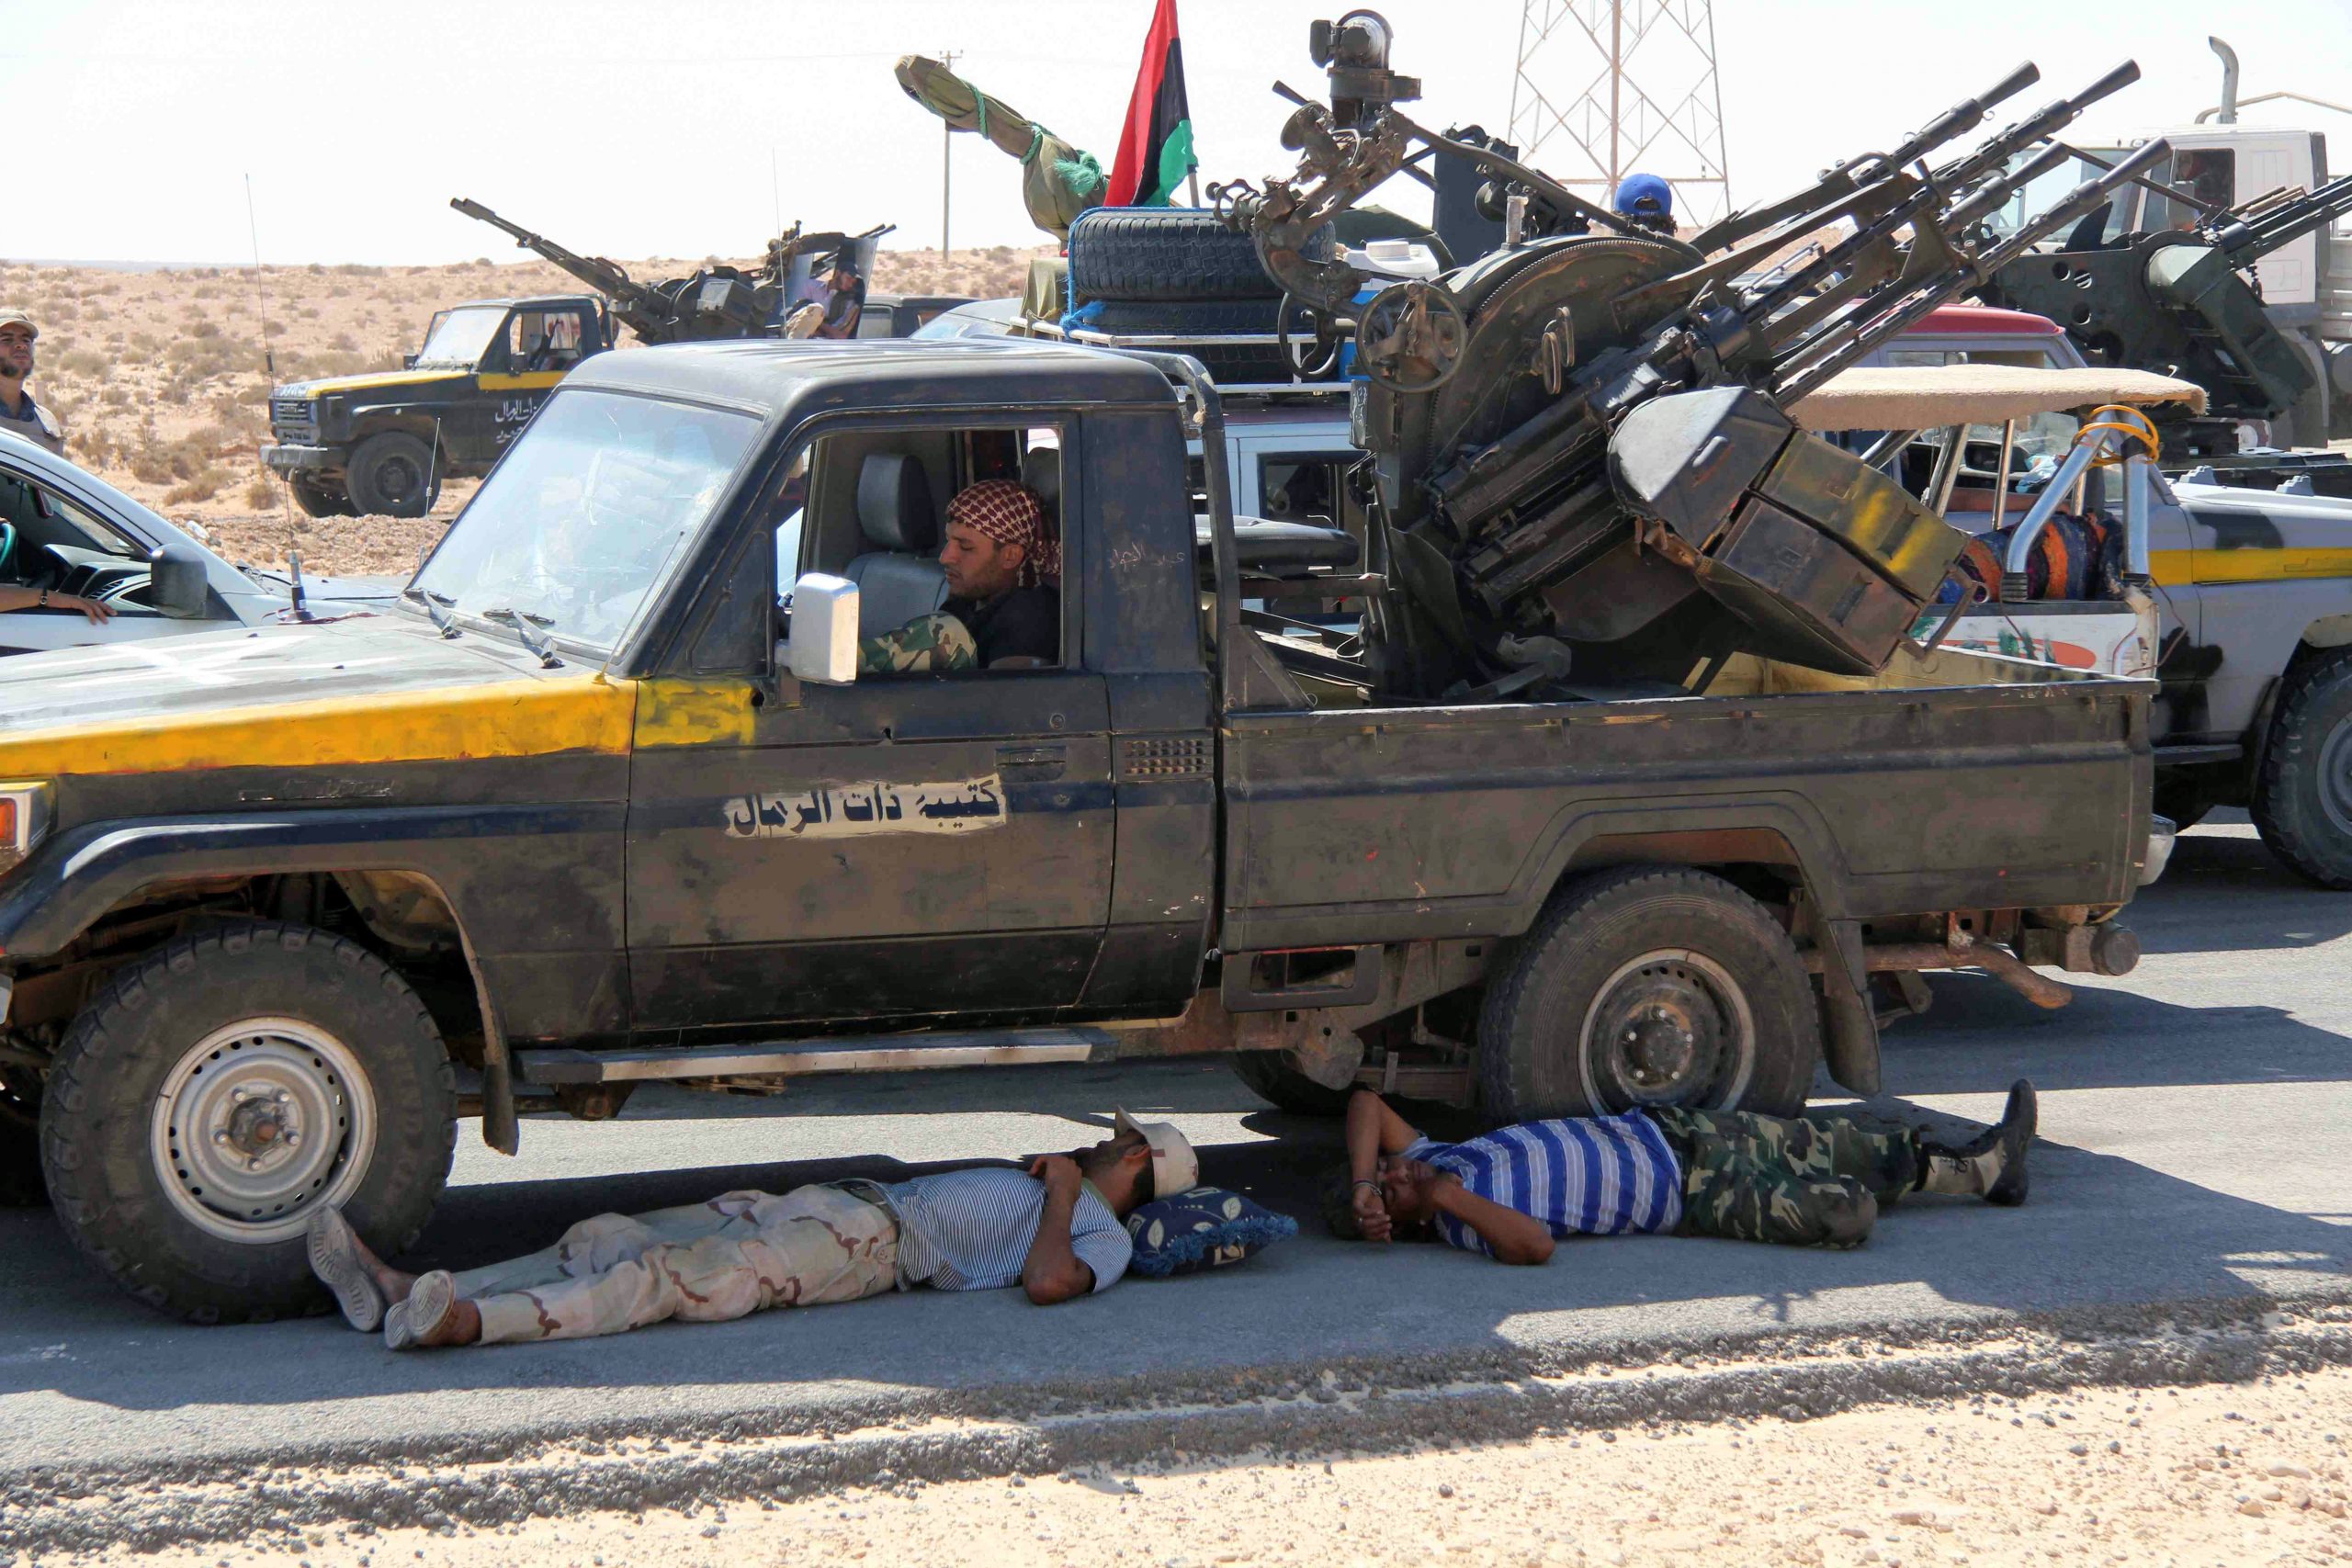 Insurgents escaping the sun while they wait for the signal for an attack outside Sirte, Libya. (Photo by Brian McQuinn)